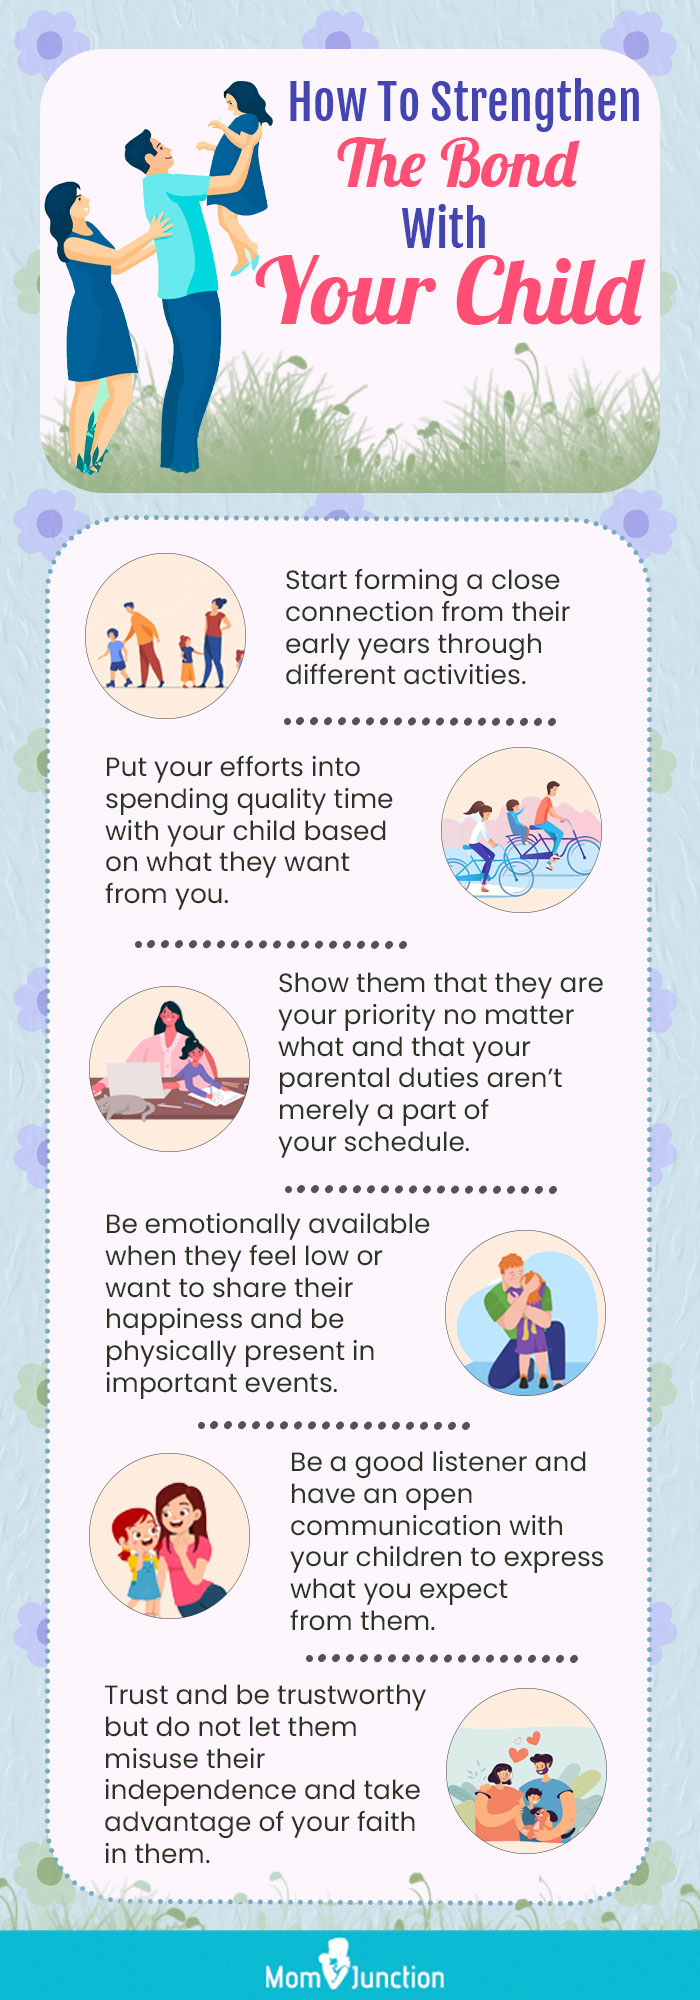 how to strengthen the bond with your child (infographic)